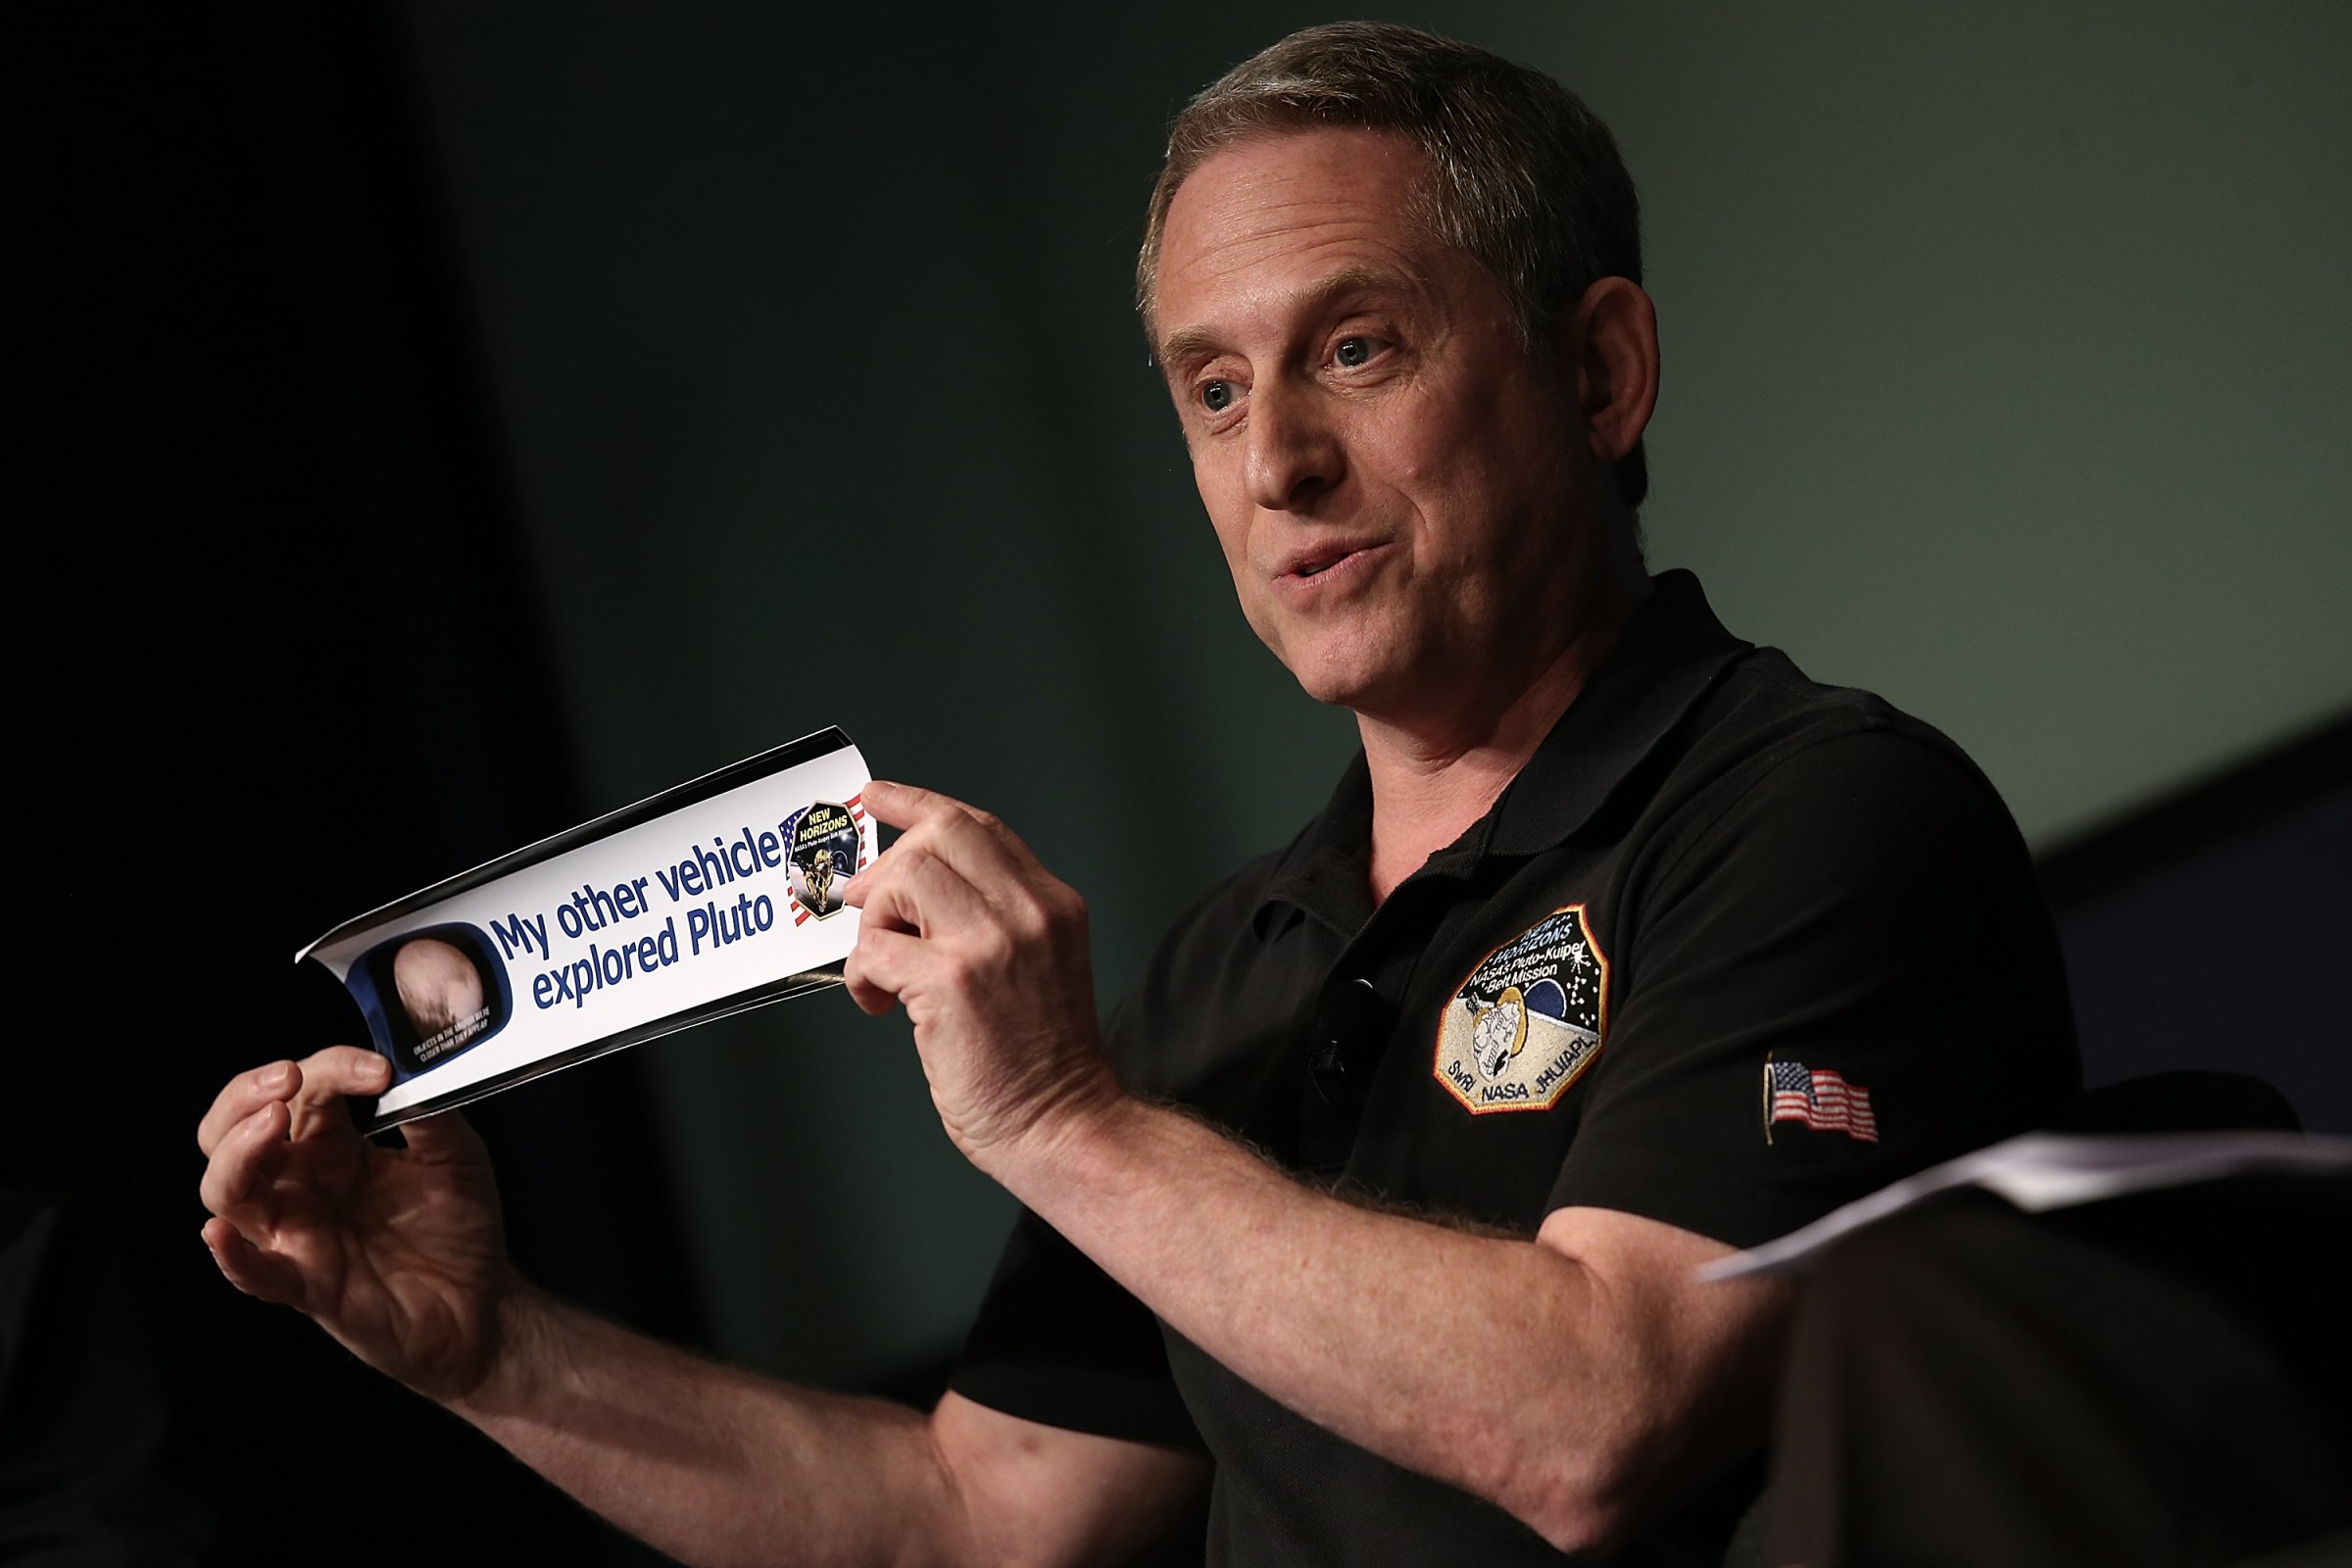 Alan Stern, principal investigator of NASA's New Horizons mission team, holds up a bumper sticker while delivering remarks during a press briefing at NASA headquarters in Washington, DC on July 24, 2015.